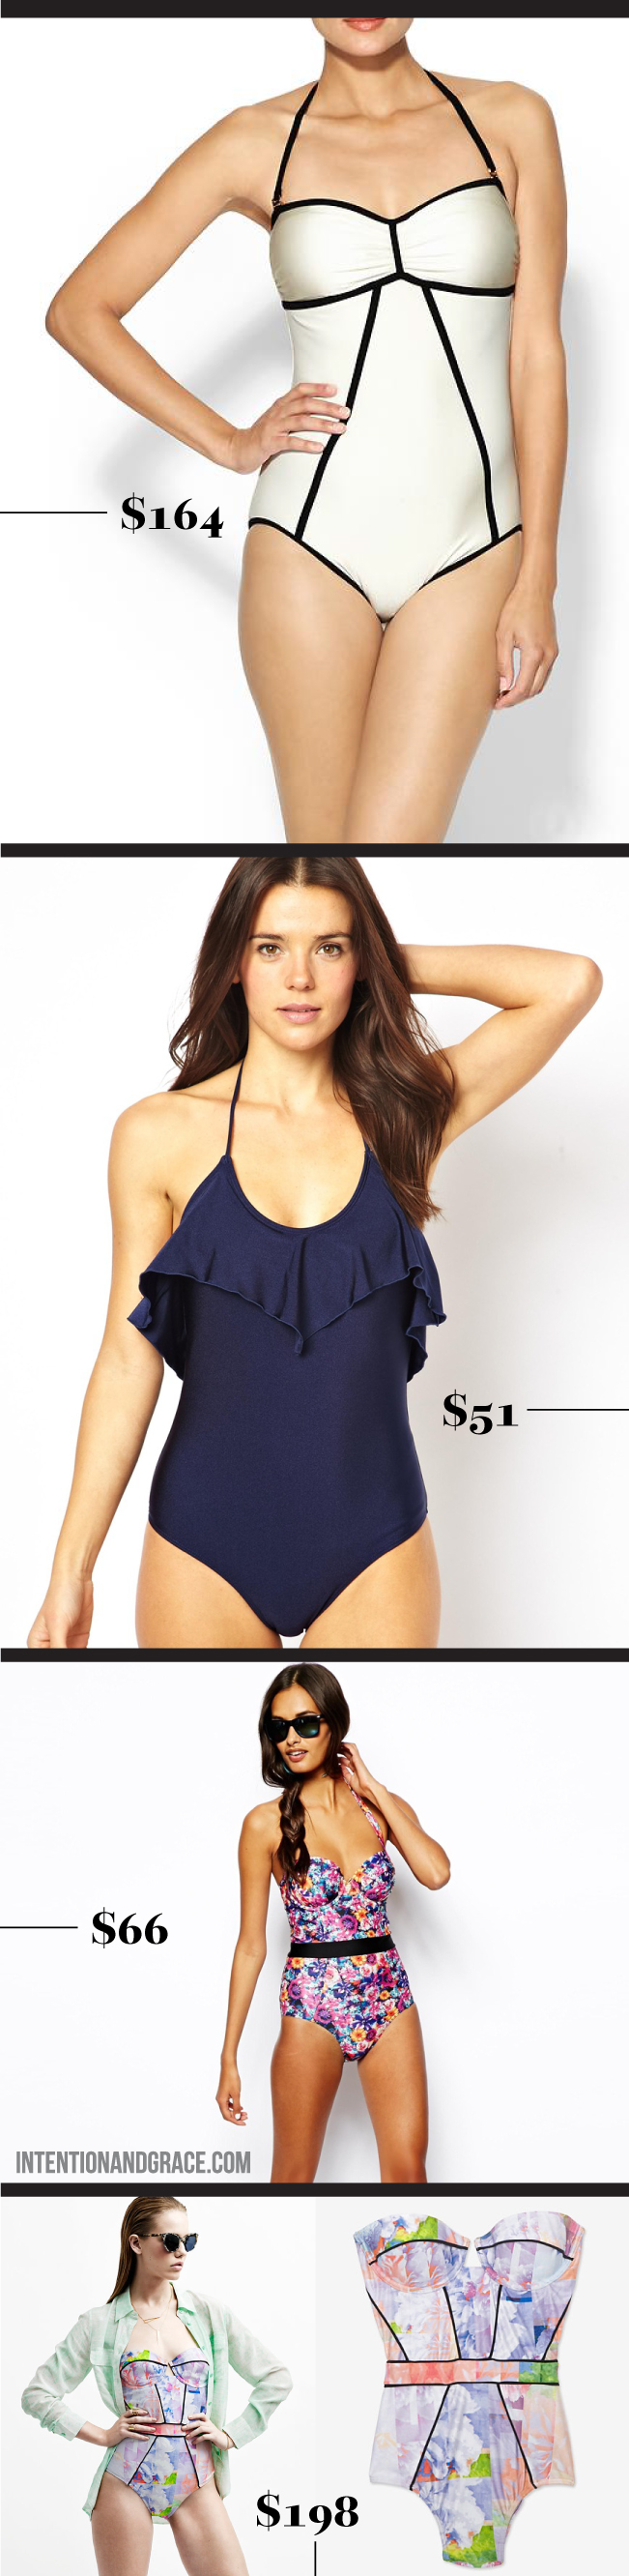 2014 Swimsuit trends for summe. Going for a One Piece, Tankini or Bikini, here are some great options.  |  Intentionandgrace.com